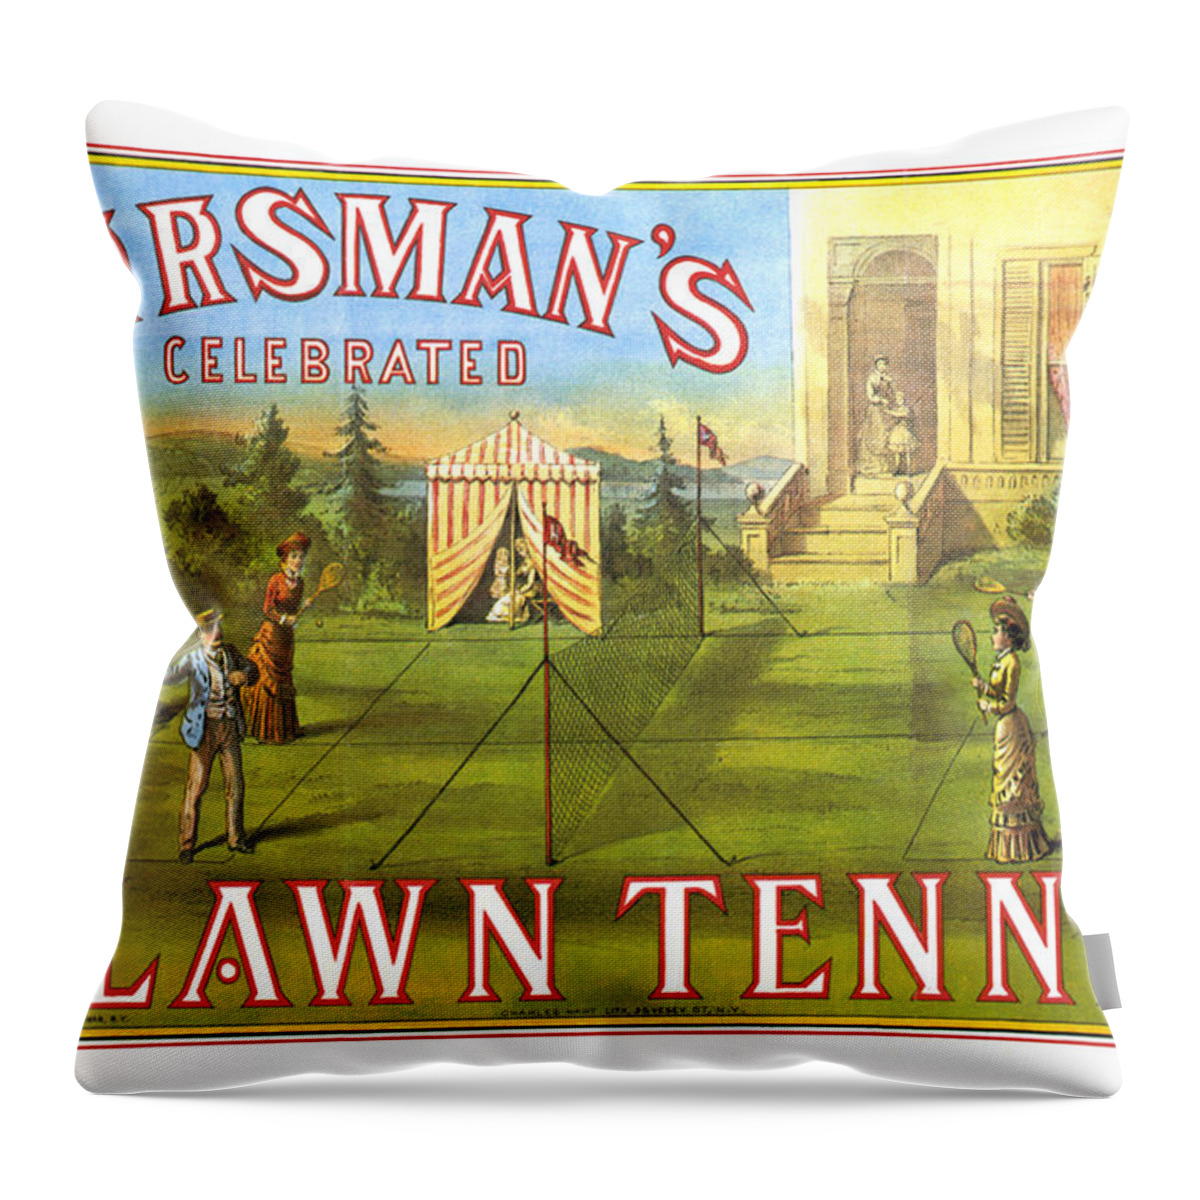 Tennis Throw Pillow featuring the painting Horsman's Celebrated Lawn Tennis by Unknown